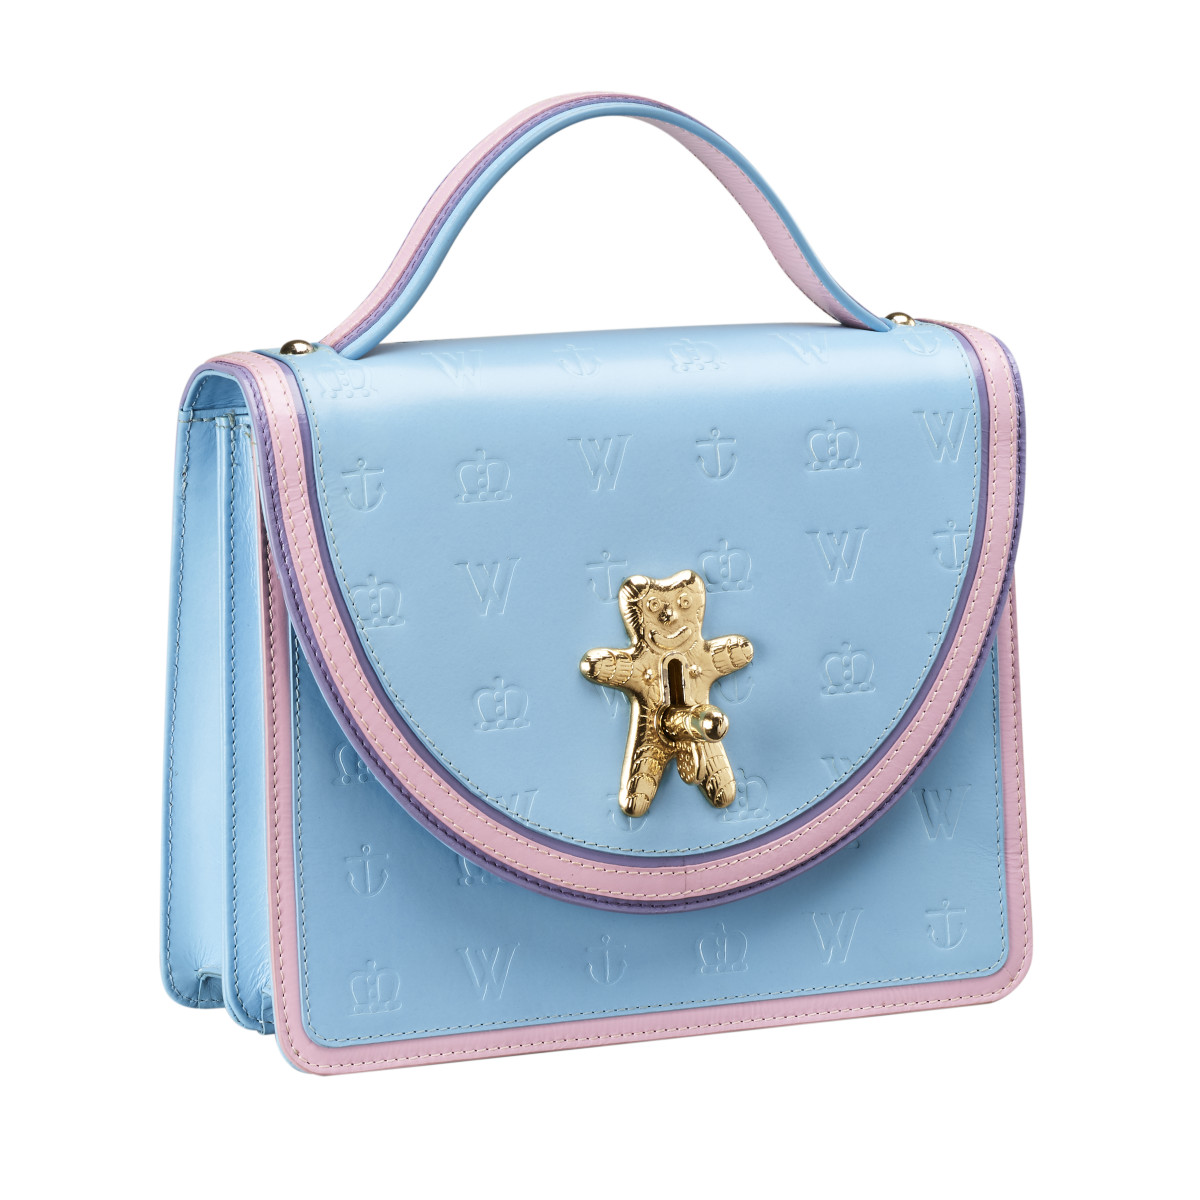 code combinatie Bedenk Grayson Perry, Limited edition top handled handbag designed by Grayson  Perry in collaboration with Osprey London (blue), 2019 | Victoria Miro